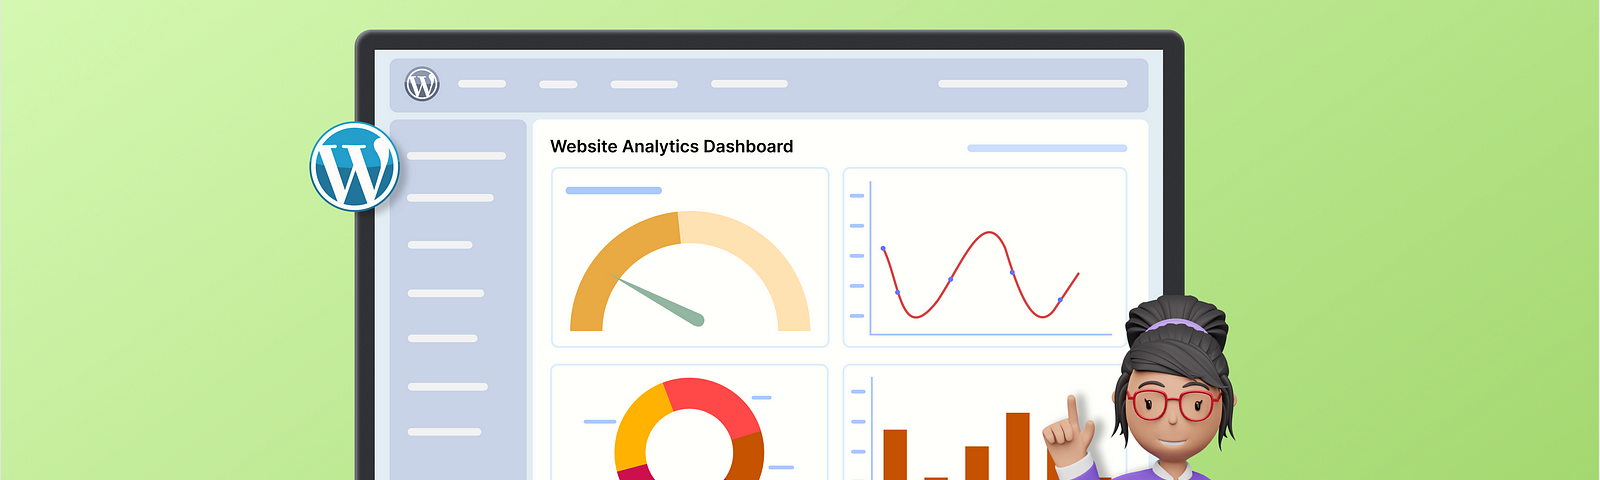 Harnessing The Power of Embedded Dashboards in WordPress Sites